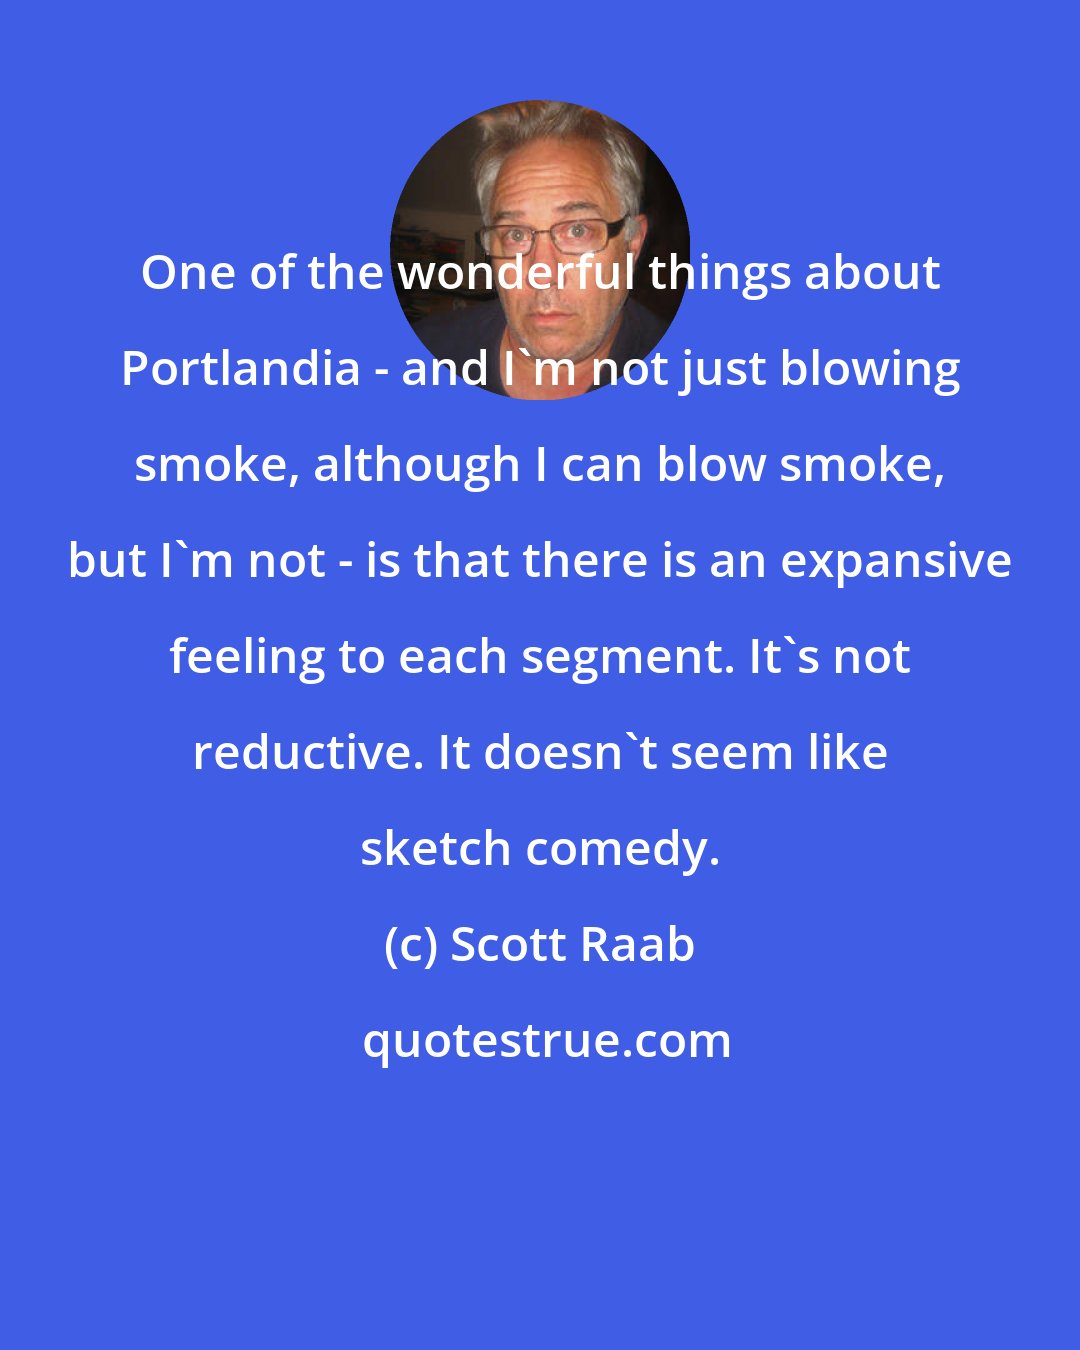 Scott Raab: One of the wonderful things about Portlandia - and I'm not just blowing smoke, although I can blow smoke, but I'm not - is that there is an expansive feeling to each segment. It's not reductive. It doesn't seem like sketch comedy.